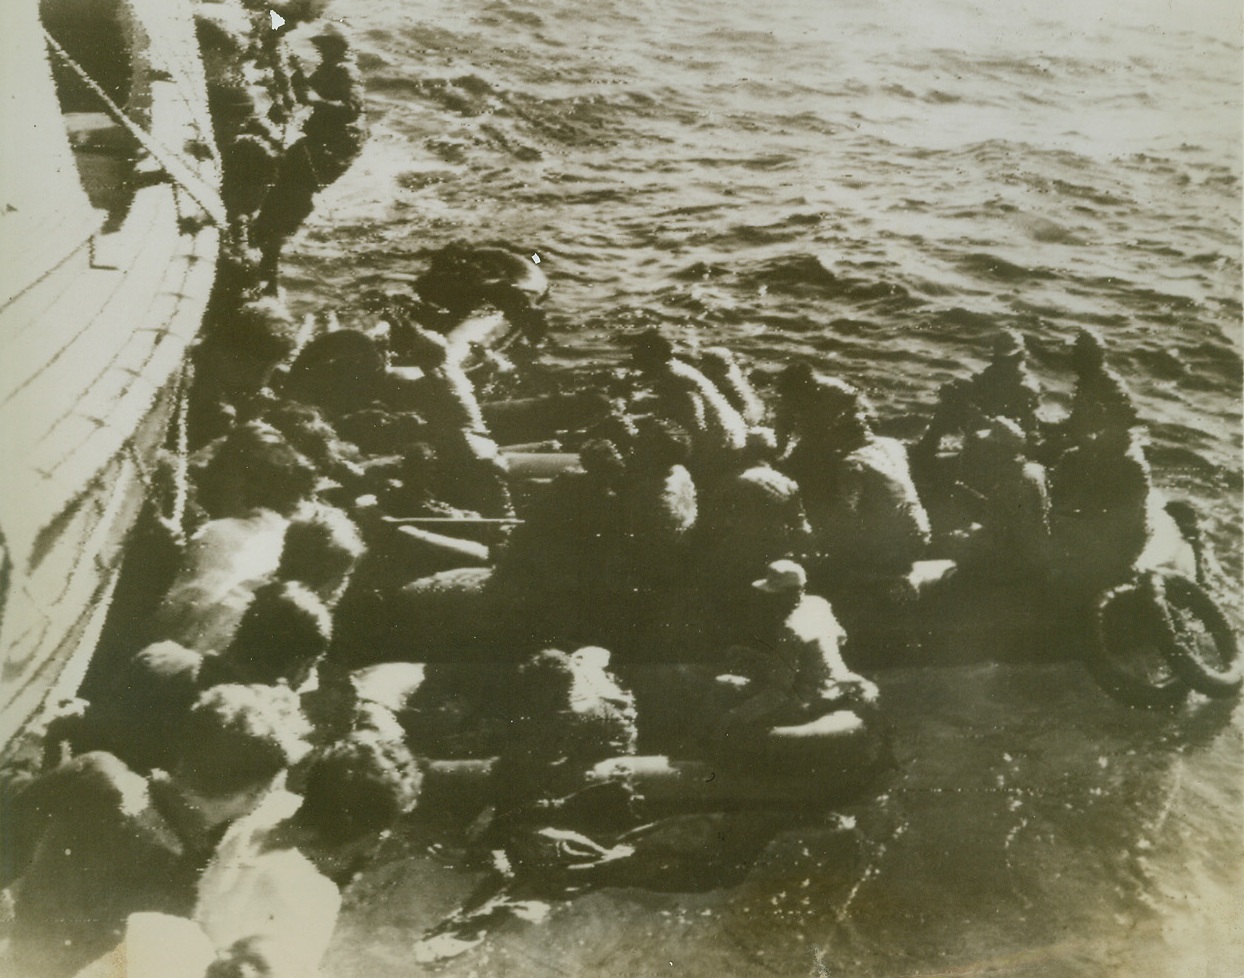 Mediterranean Round-Up, 5/20/1943. A British destroyer rounds us a load of would-be Nazi escapists 20 miles from land, midway between Tunisia and Pantelleria. Most of these Nazis are Luftwaffe anti-aircraft gunners. There would have been plenty of business for them had they escaped to the Mediterranean island, for Allied flyers are giving it a constant pounding.Credit (ACME Radiophoto);